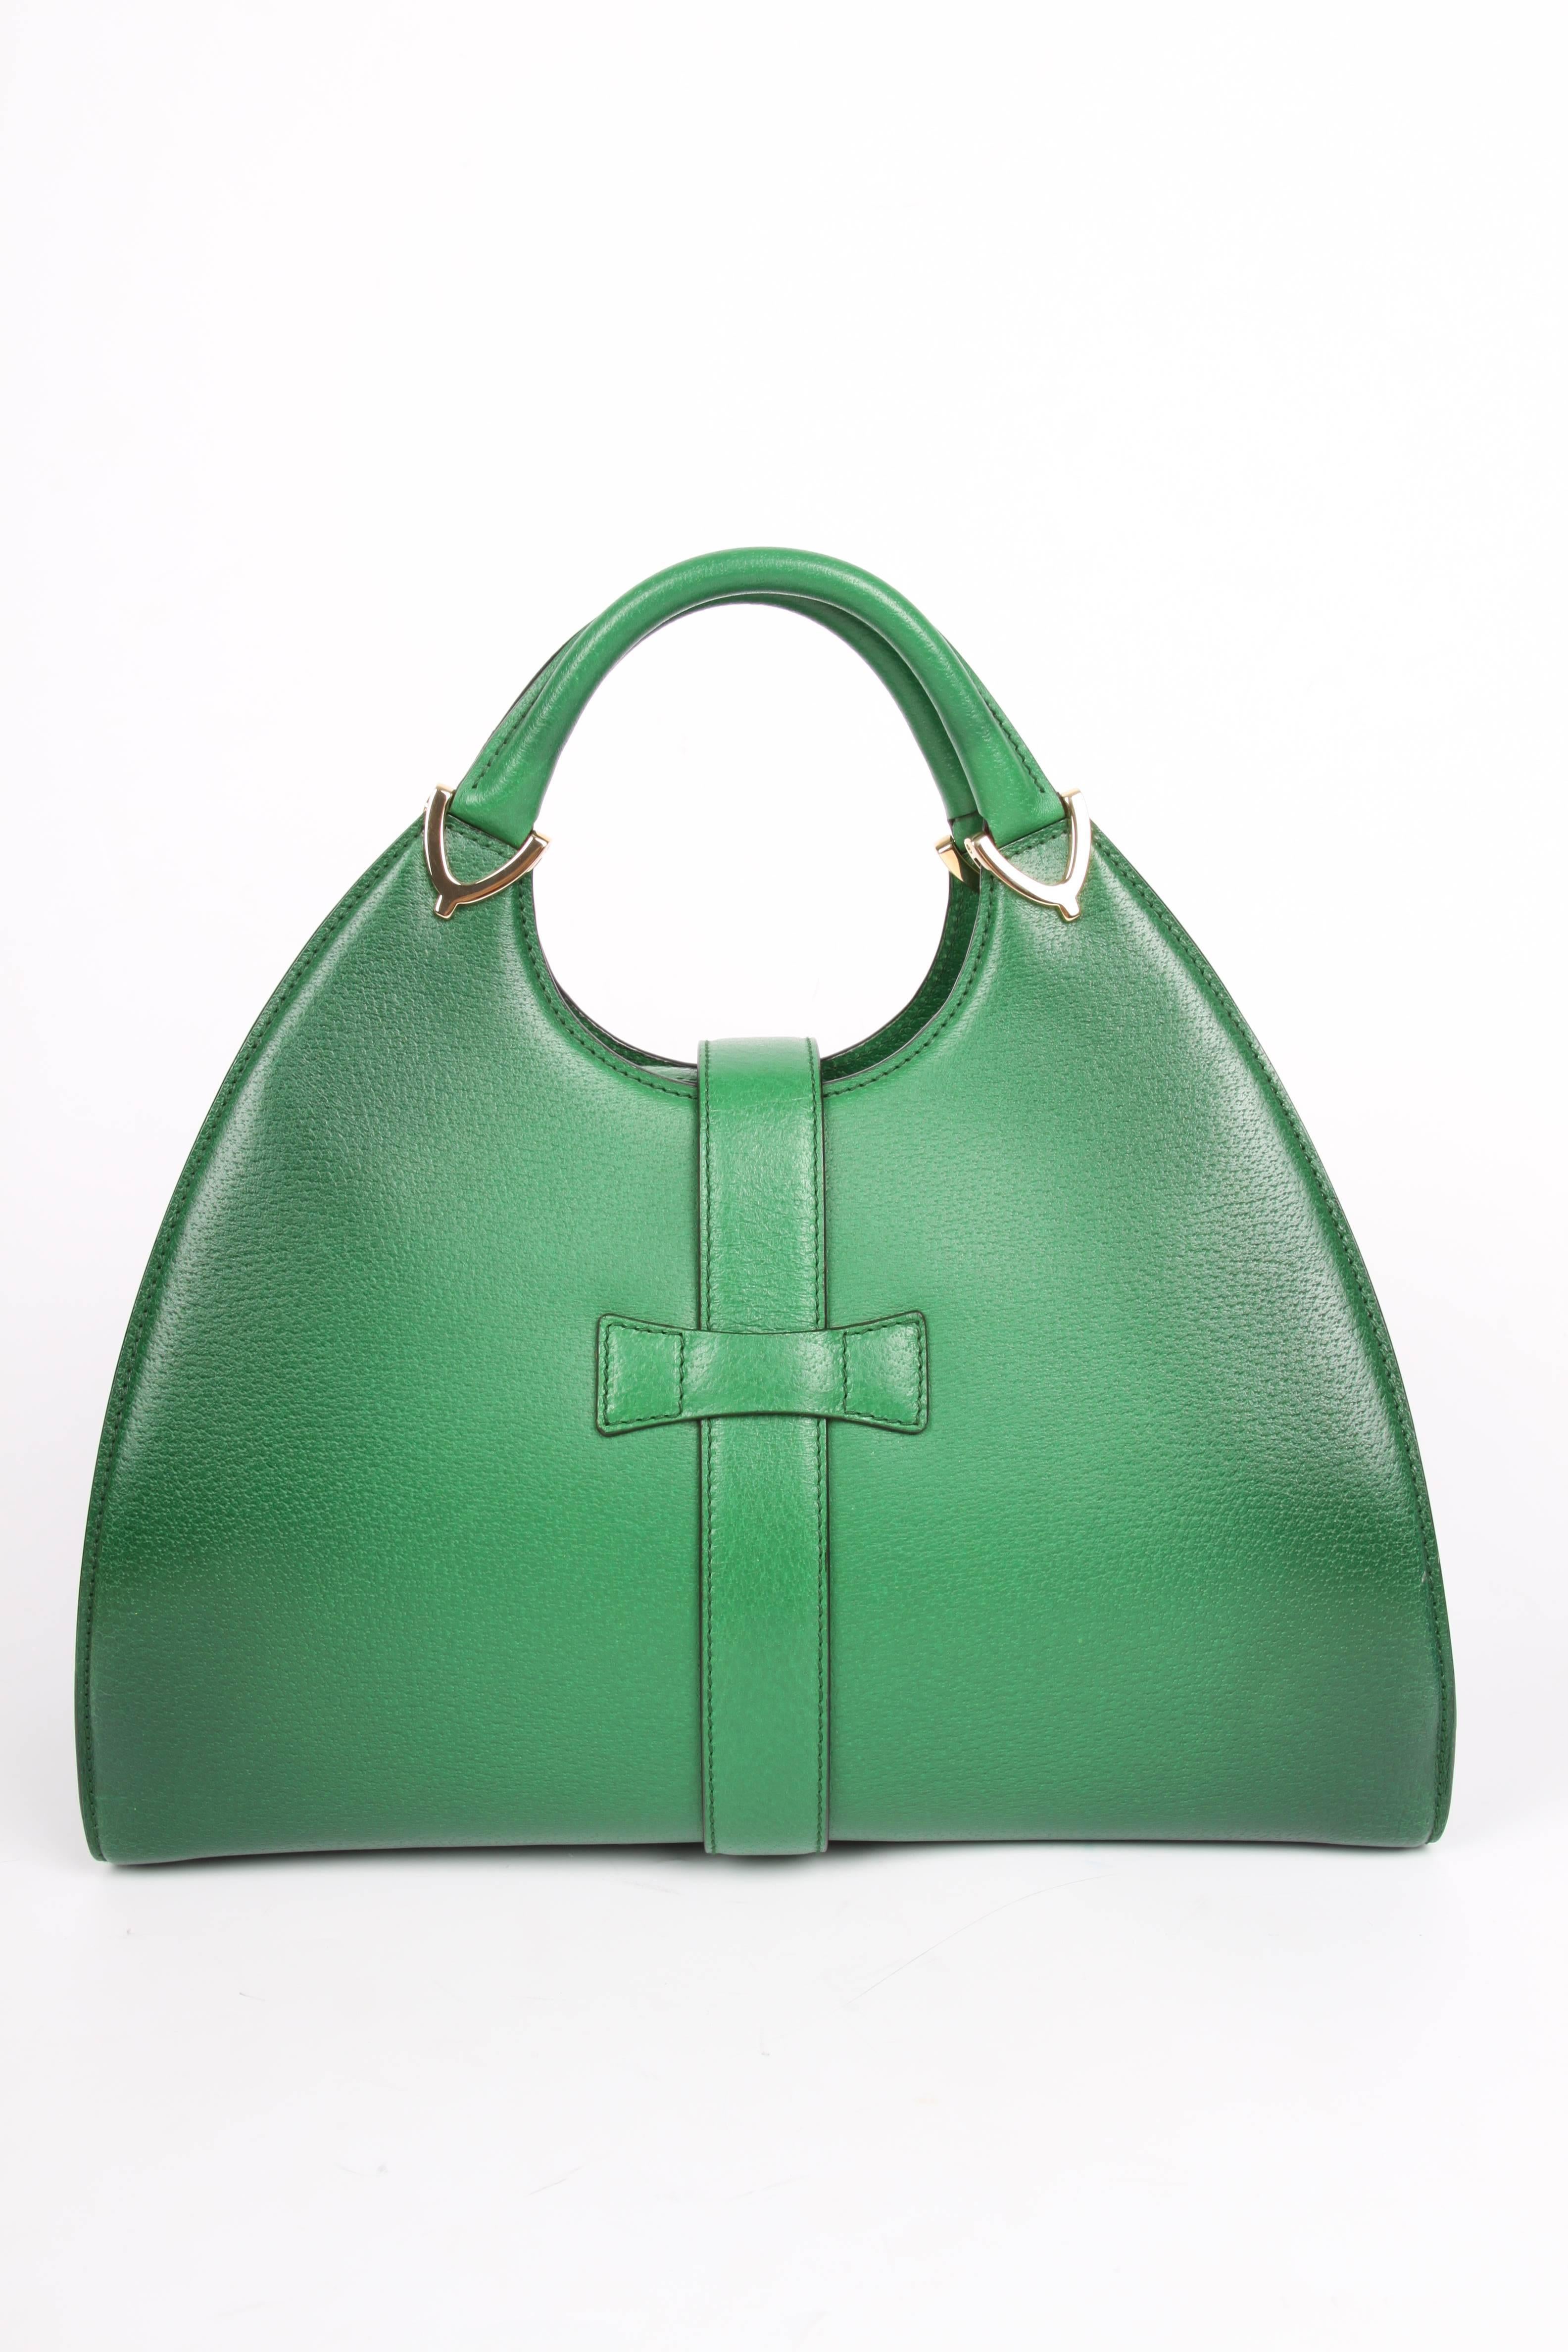 Oh, what a beauty! Green pig skin leather bag by Gucci; this is the Stirrip Top Handle Bag.

A popular bag in a rather large size, front closure with a strap and a push button and gold-tone hardware.

Inside lining in black leather. Two flat